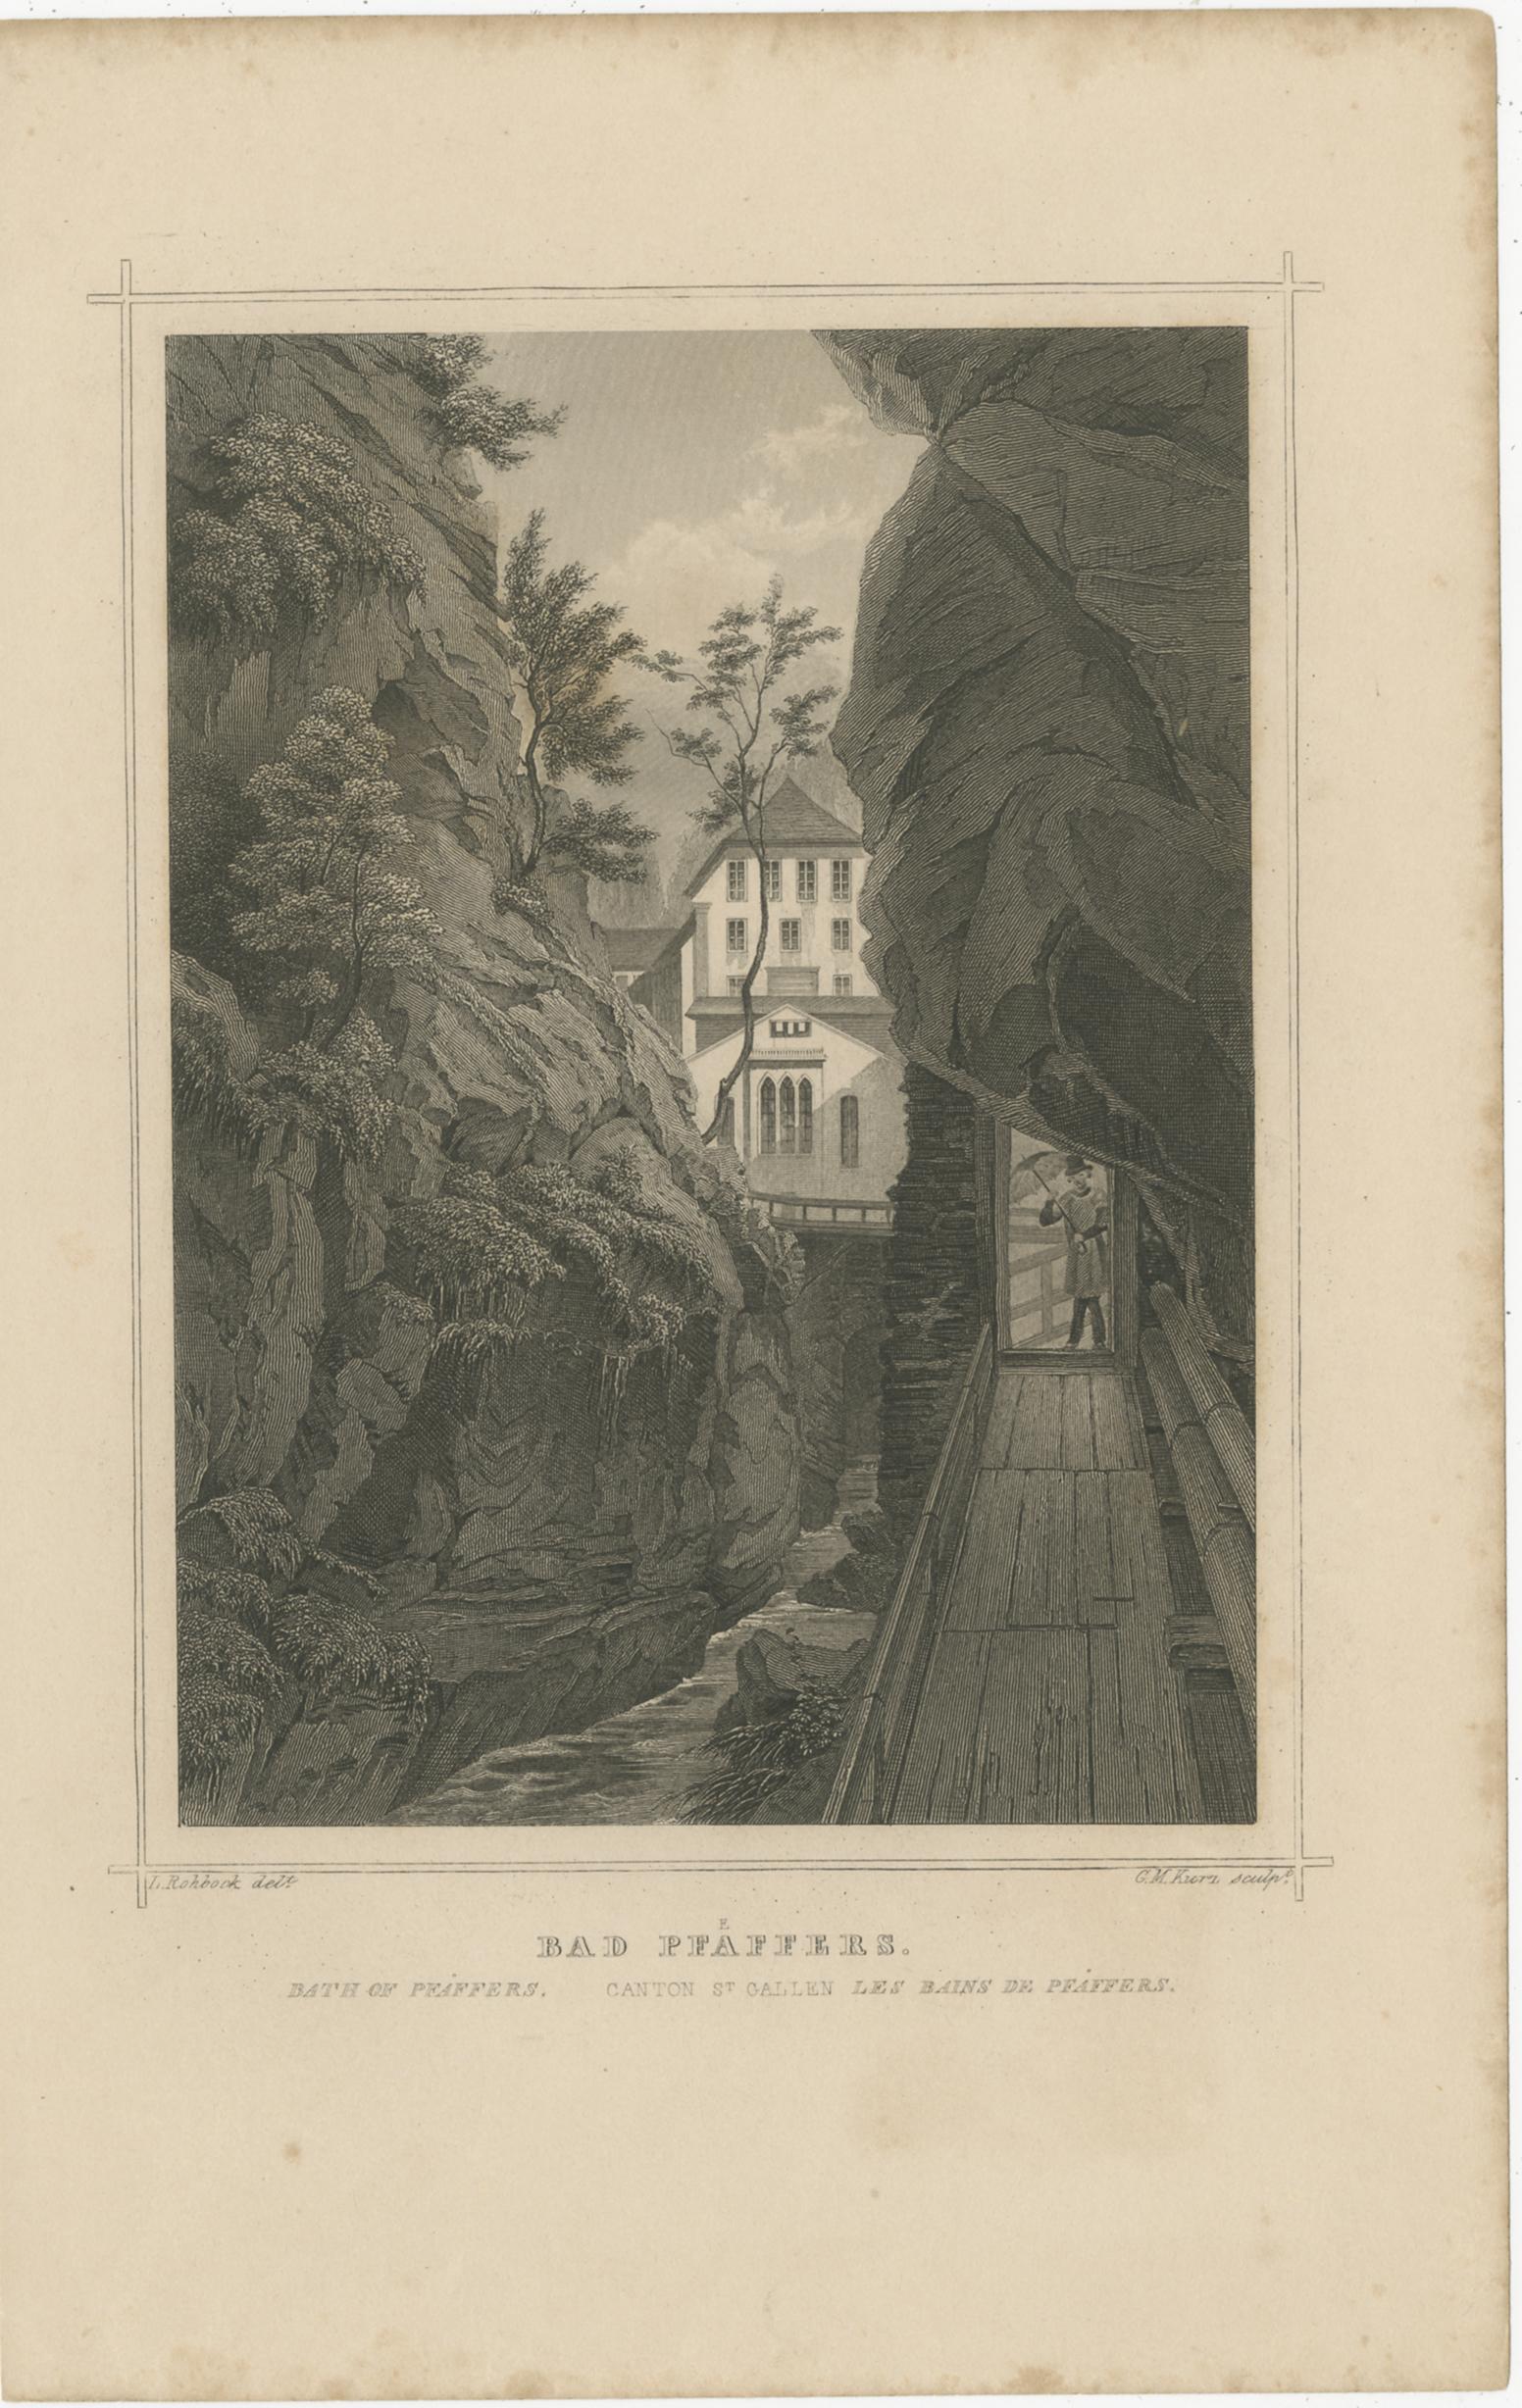 Antique print titled 'Bad Pfaeffers, Canton St. Gallen'. View of Bad Pfäfers, or Pfäfers Spa. Today, it is the oldest Baroque bath-house in Switzerland, houses a restaurant and a museum.

Engraved by G.M. Kurz after Rohbock. Published circa 1860.